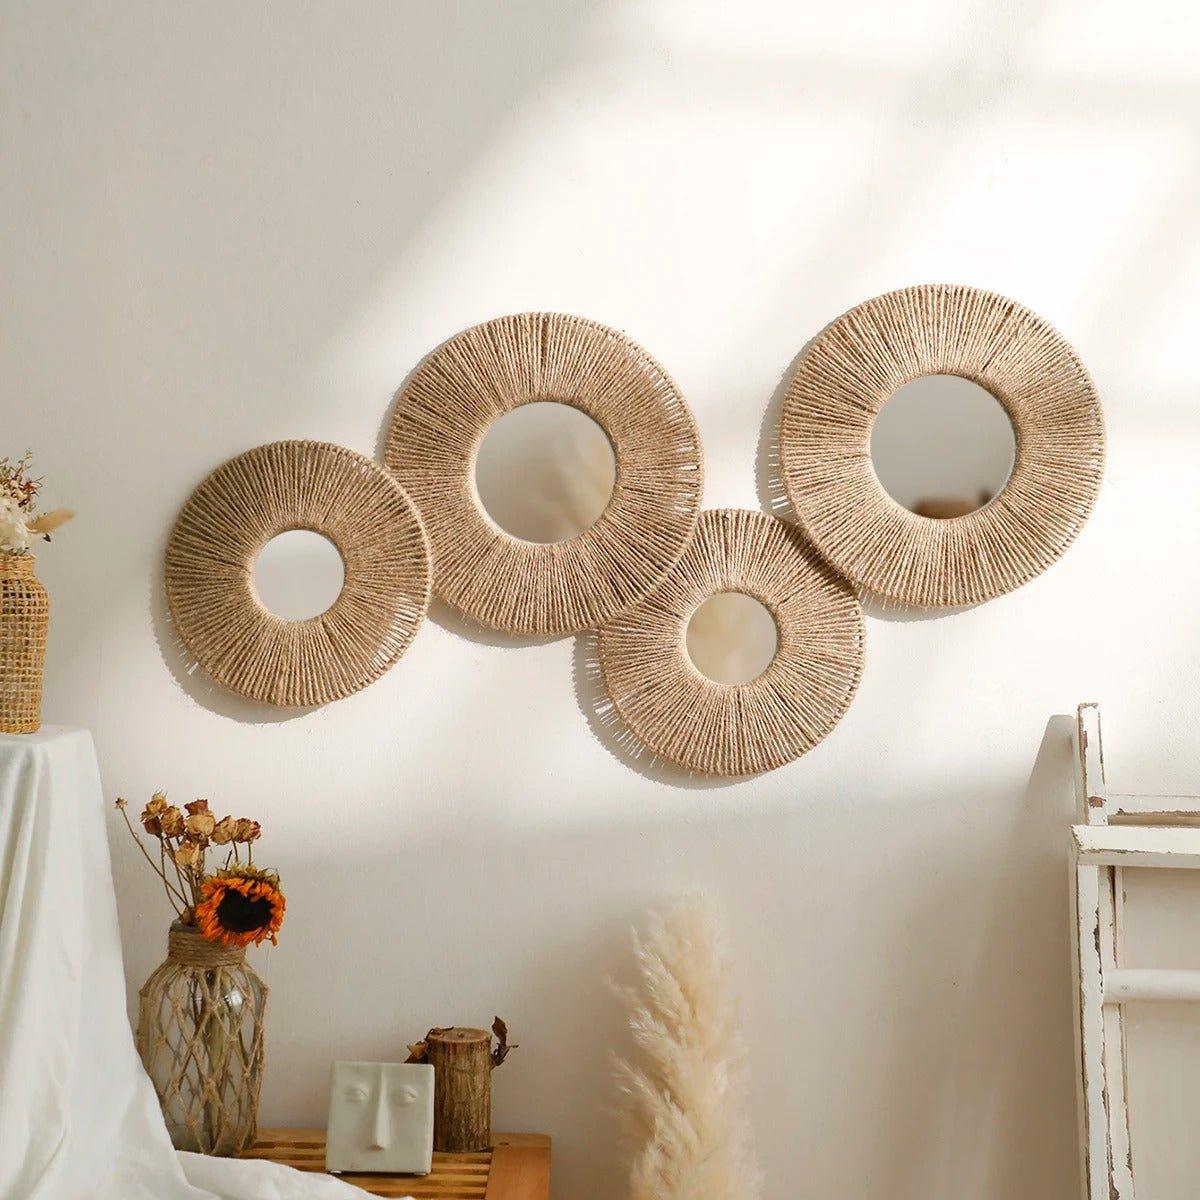 Boho Round Wall Hanging Decorative Mirrors with Woven Hemp Rope - Besontique